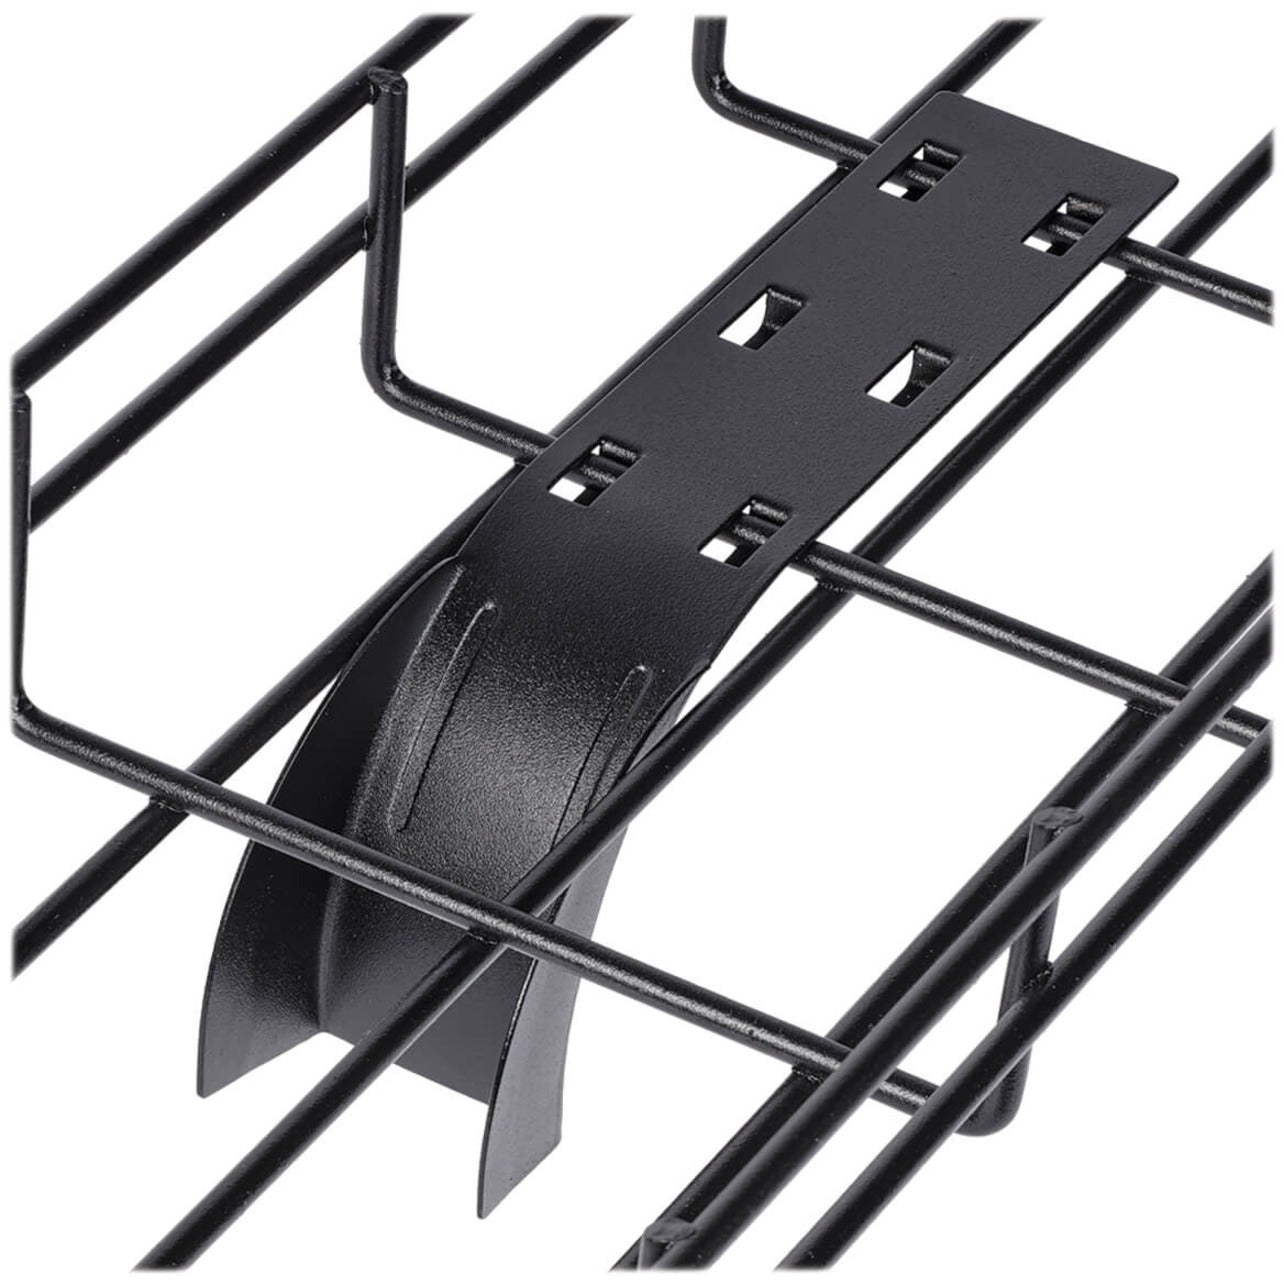 Tripp Lite SRWBDROP Cable Exit Clip/Dropout Waterfall for Wire Mesh Cable Trays, 45 mm Wide, Black Powder Coat